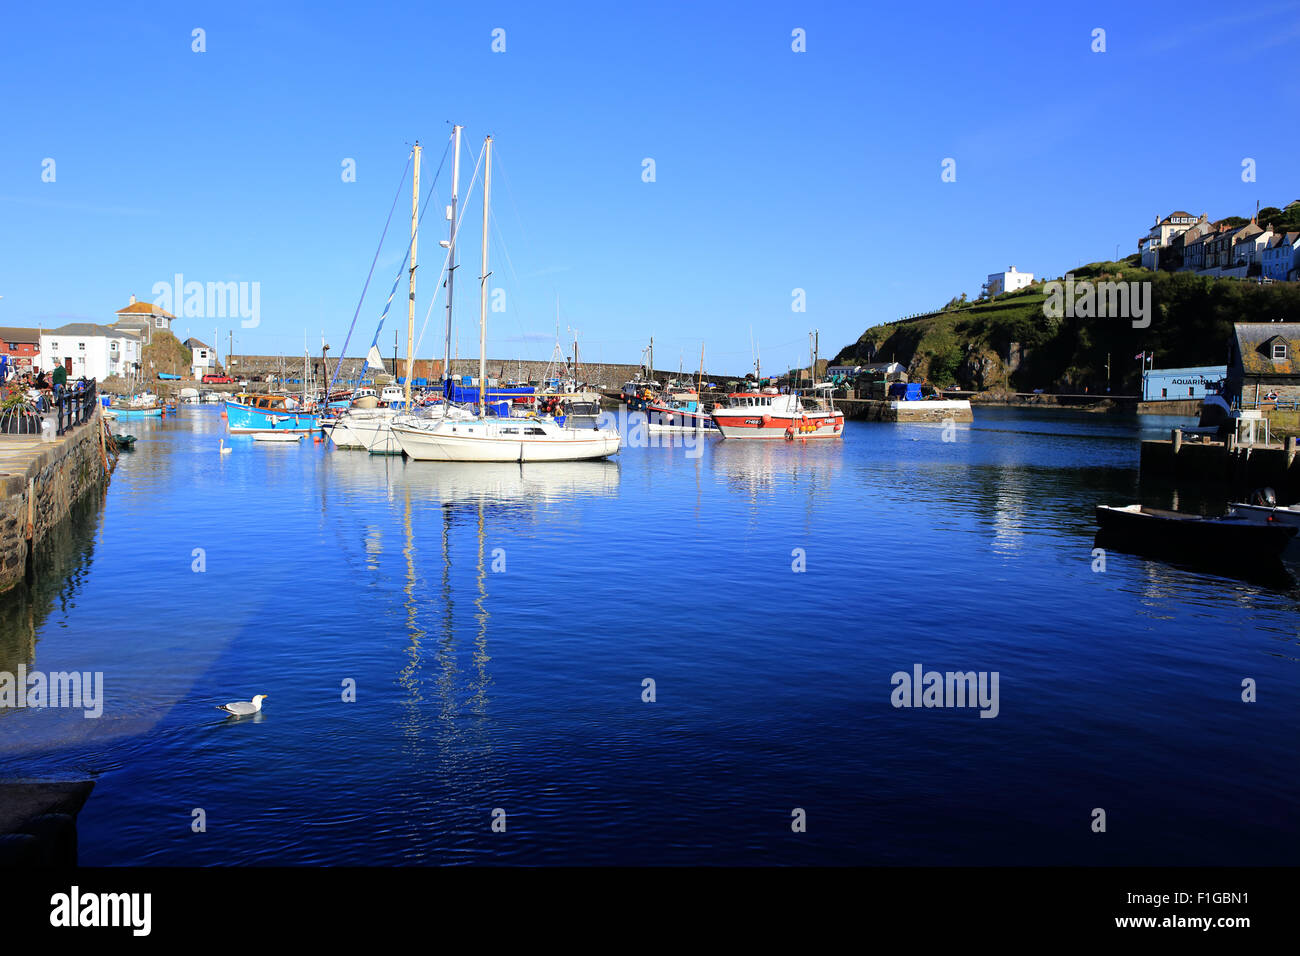 Fishing boats and yachts on a fine Spring day in the Inner Harbour of Mevagissey, Cornwall, England, UK. Stock Photo